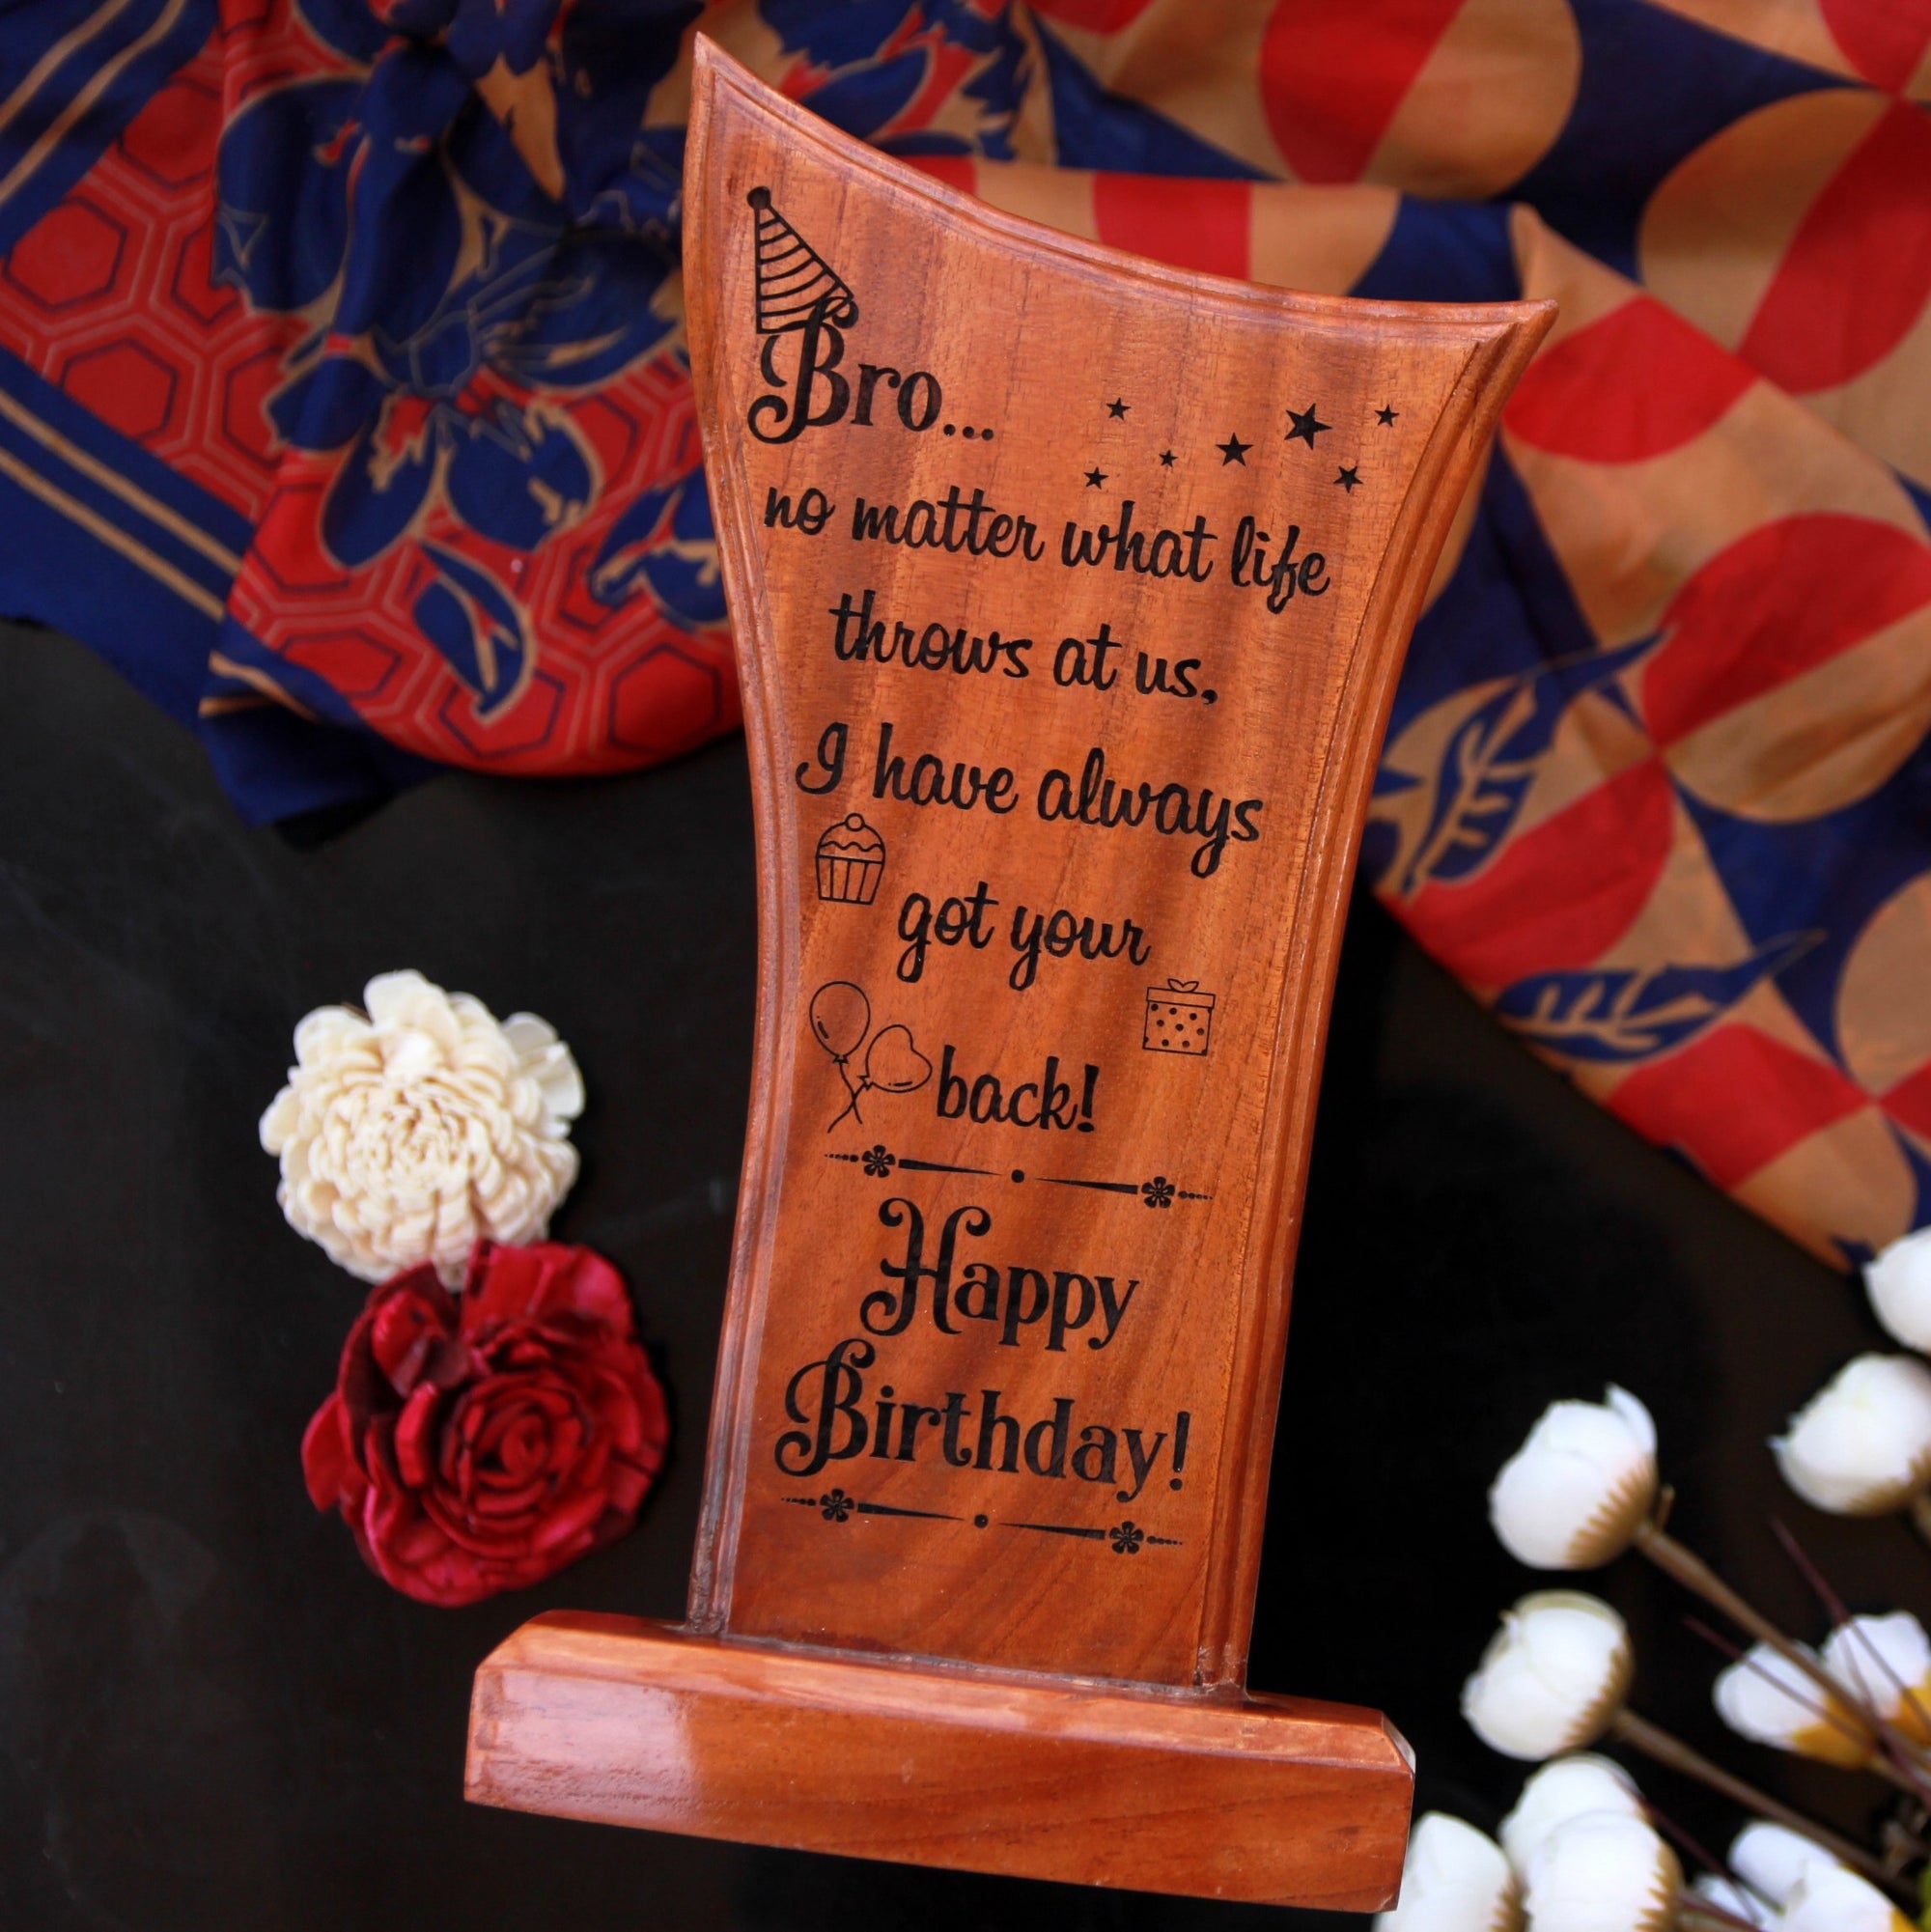 This Wooden Plaque Engraved With A Birthday Message Is The Best Birthday Gift For Brother. Looking for gifts for brother? This Birthday Greetings Engraved On This Wooden Award Plaque Is A Great Personalized Gift.